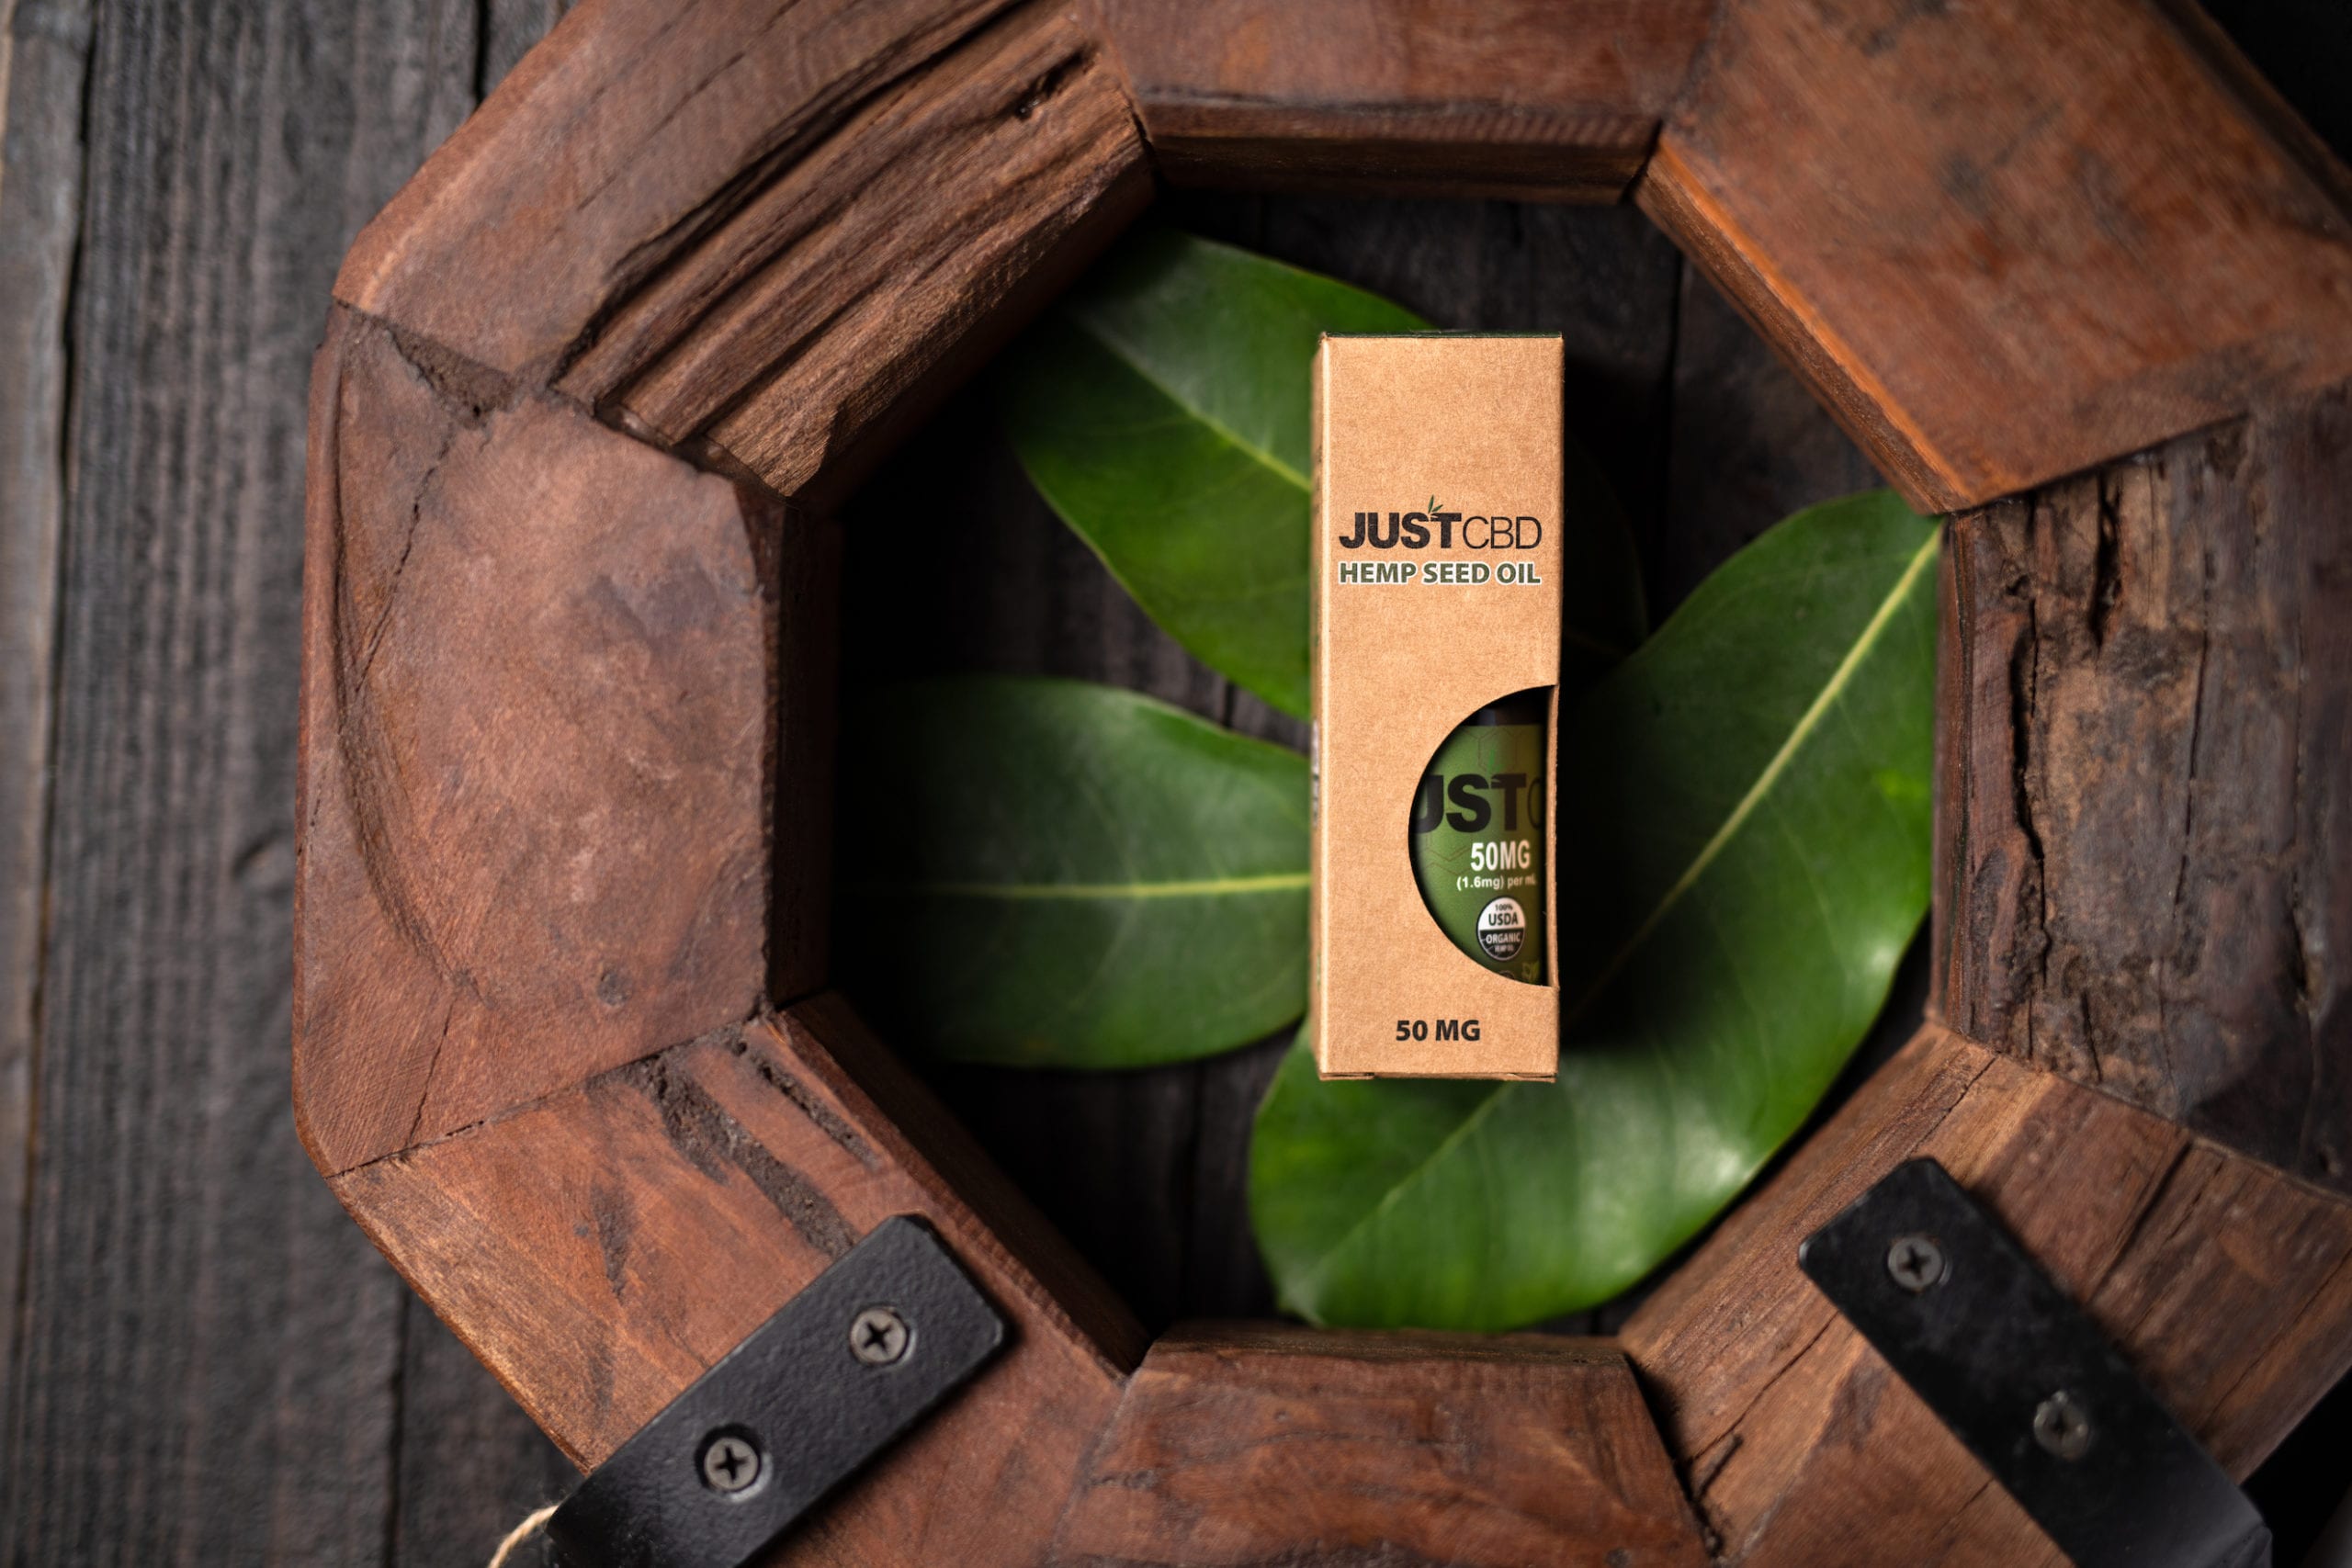 IU C&I Studios Portfolio JustCBD Product Photography and Just CBD Products JUSTCBD Hemp Seed Oil package on display on green plant leaves surrounded by wood blocks